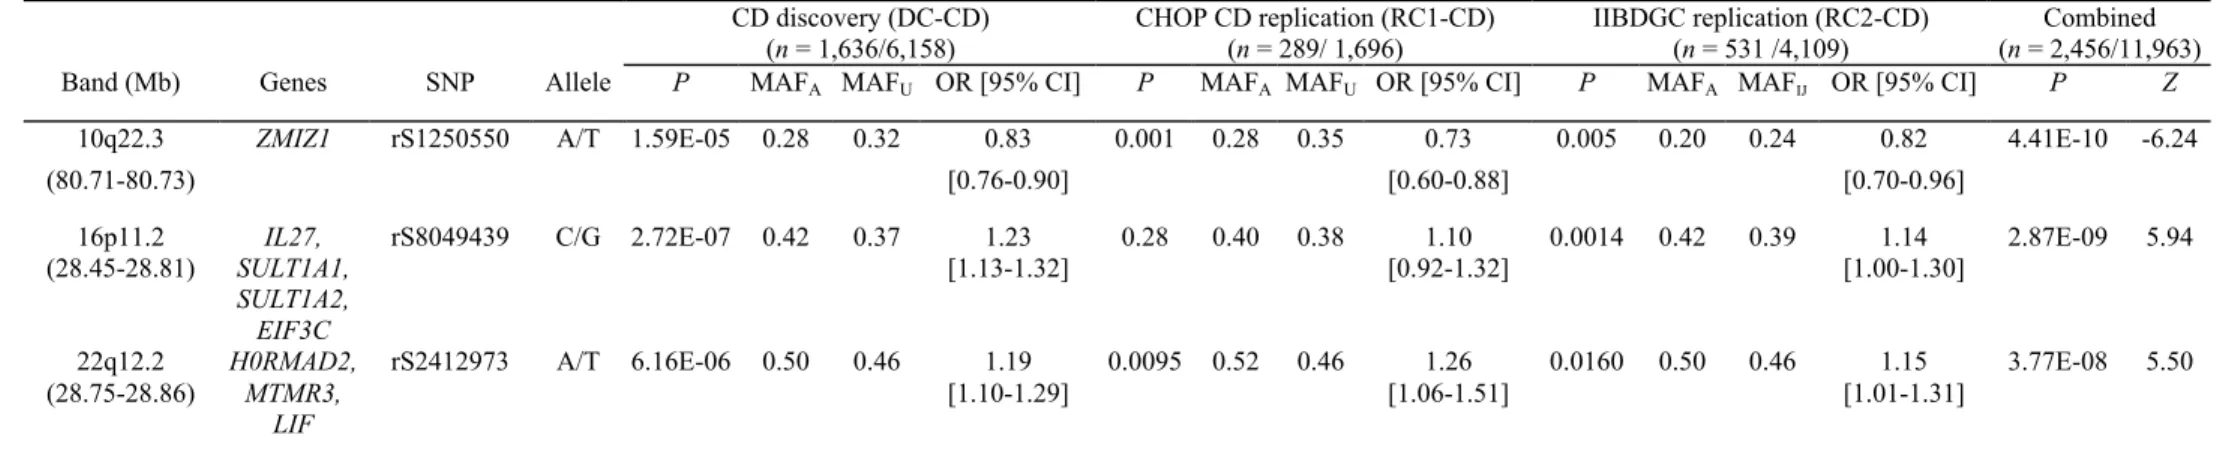 Table 1 Newly discovered loci significant in the GWAS of the DC-CD, RC1-CD and RC2-CD cohorts  CD discovery (DC-CD)  (n = 1,636/6,158)  CHOP CD replication (RC1-CD) (n = 289/ 1,696)  IIBDGC replication (RC2-CD) (n = 531 /4,109)  Combined  (n = 2,456/11,963